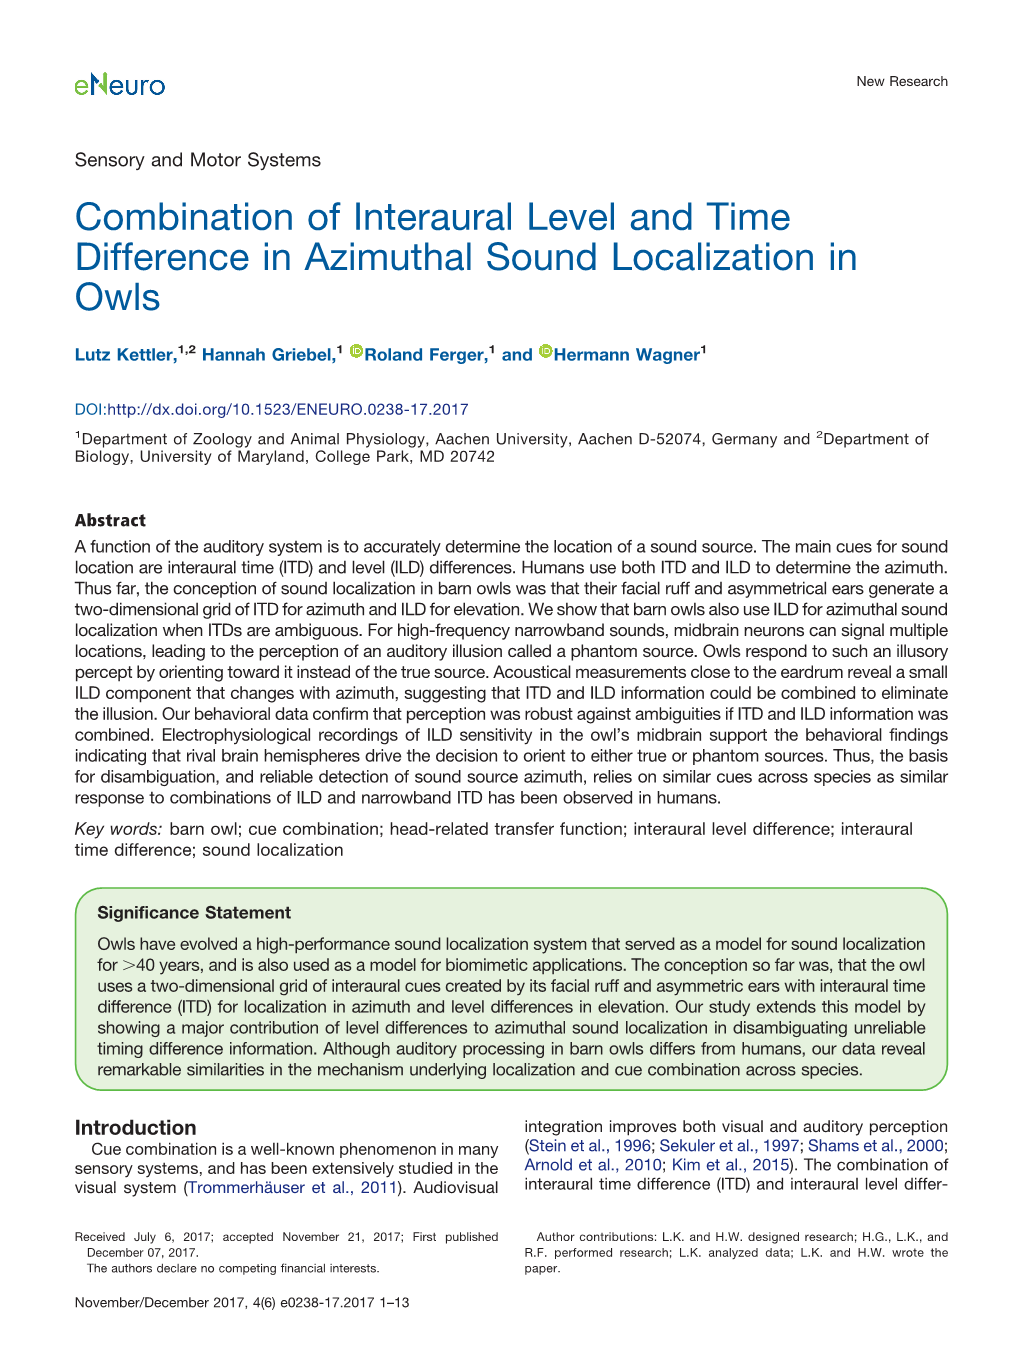 Combination of Interaural Level and Time Difference in Azimuthal Sound Localization in Owls